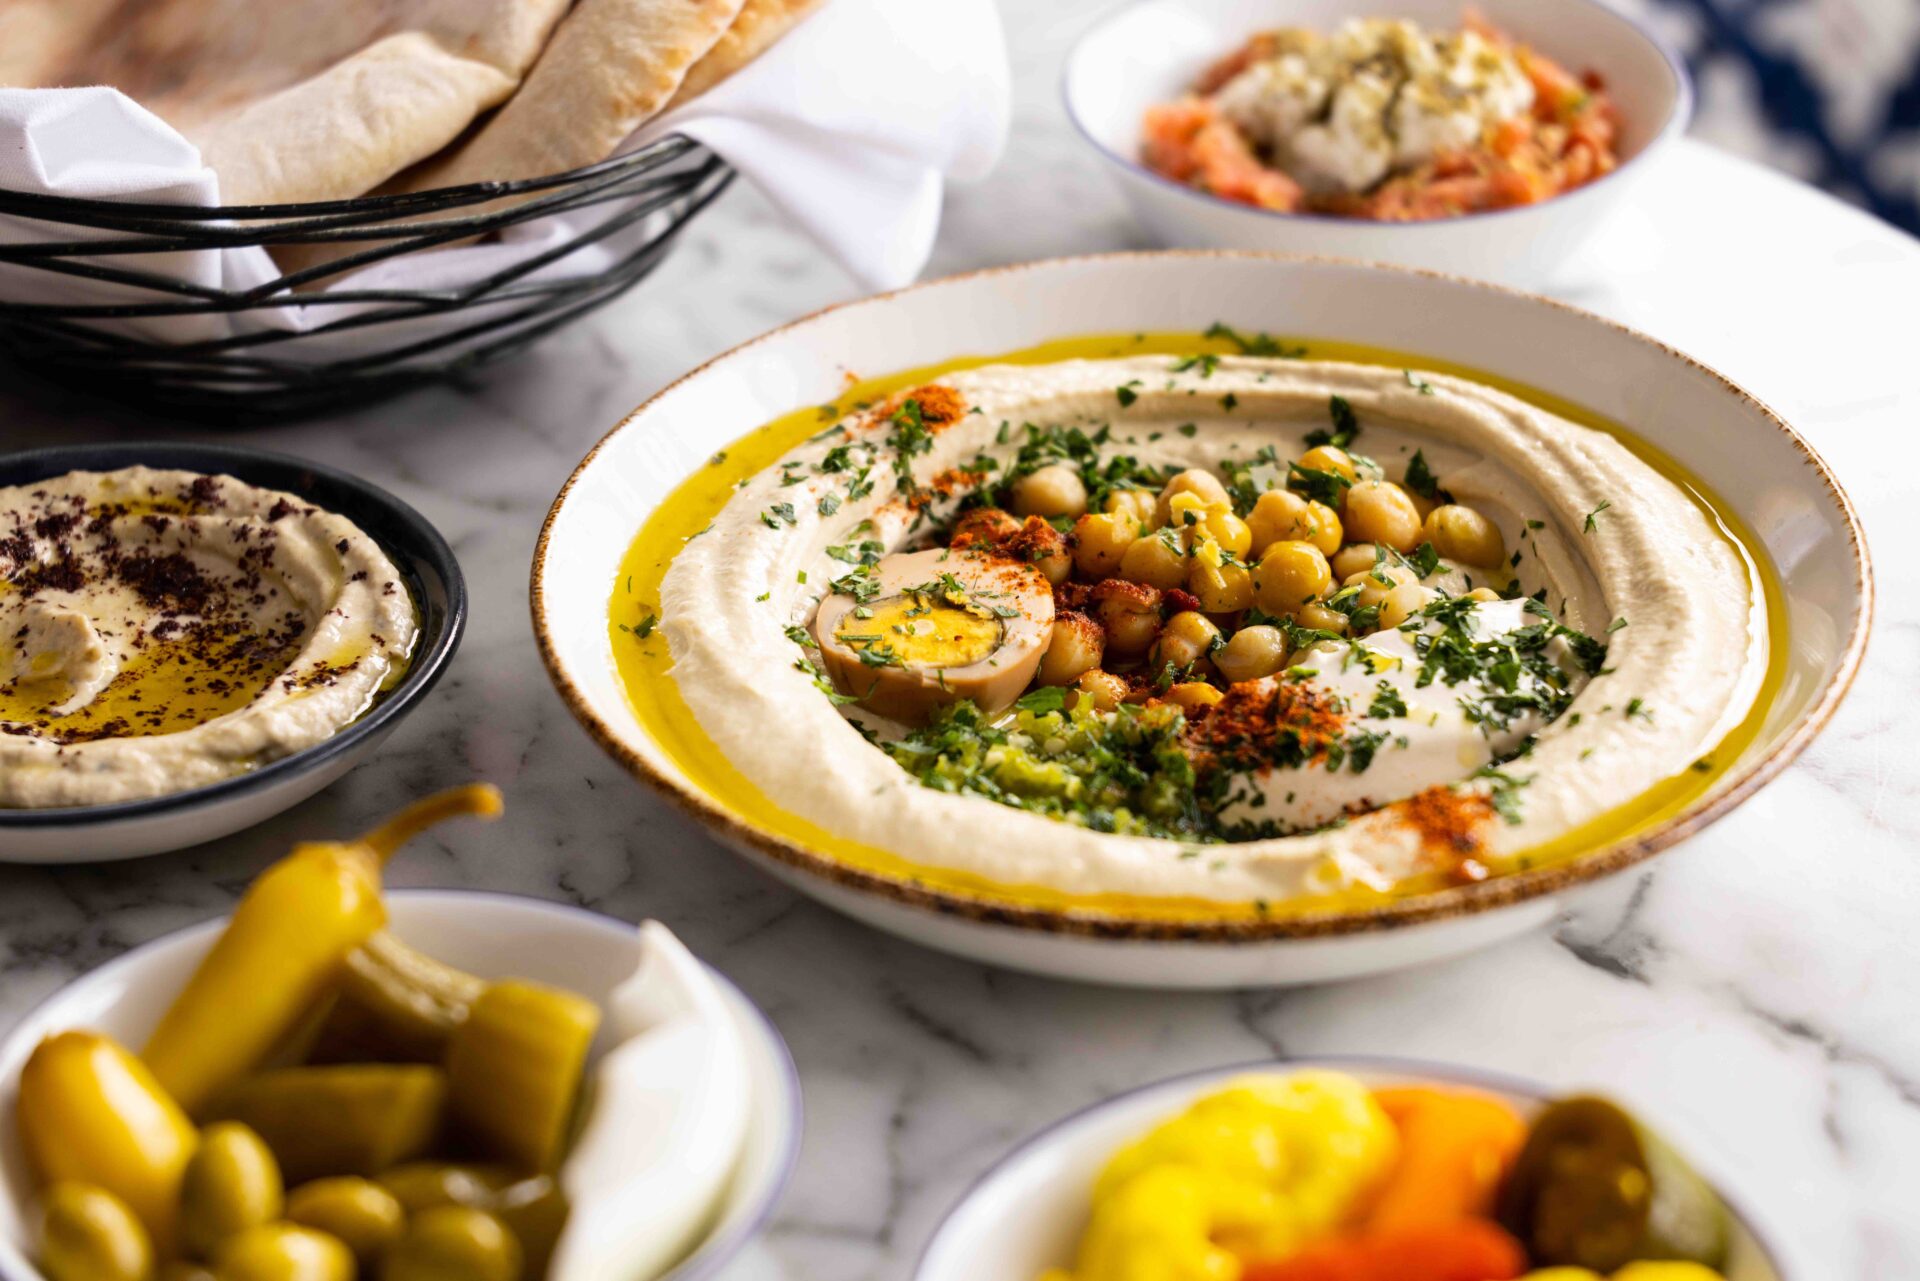 Hamsa Baba Ganoush in a white bowl topped with chickpeas, egg, and herbs